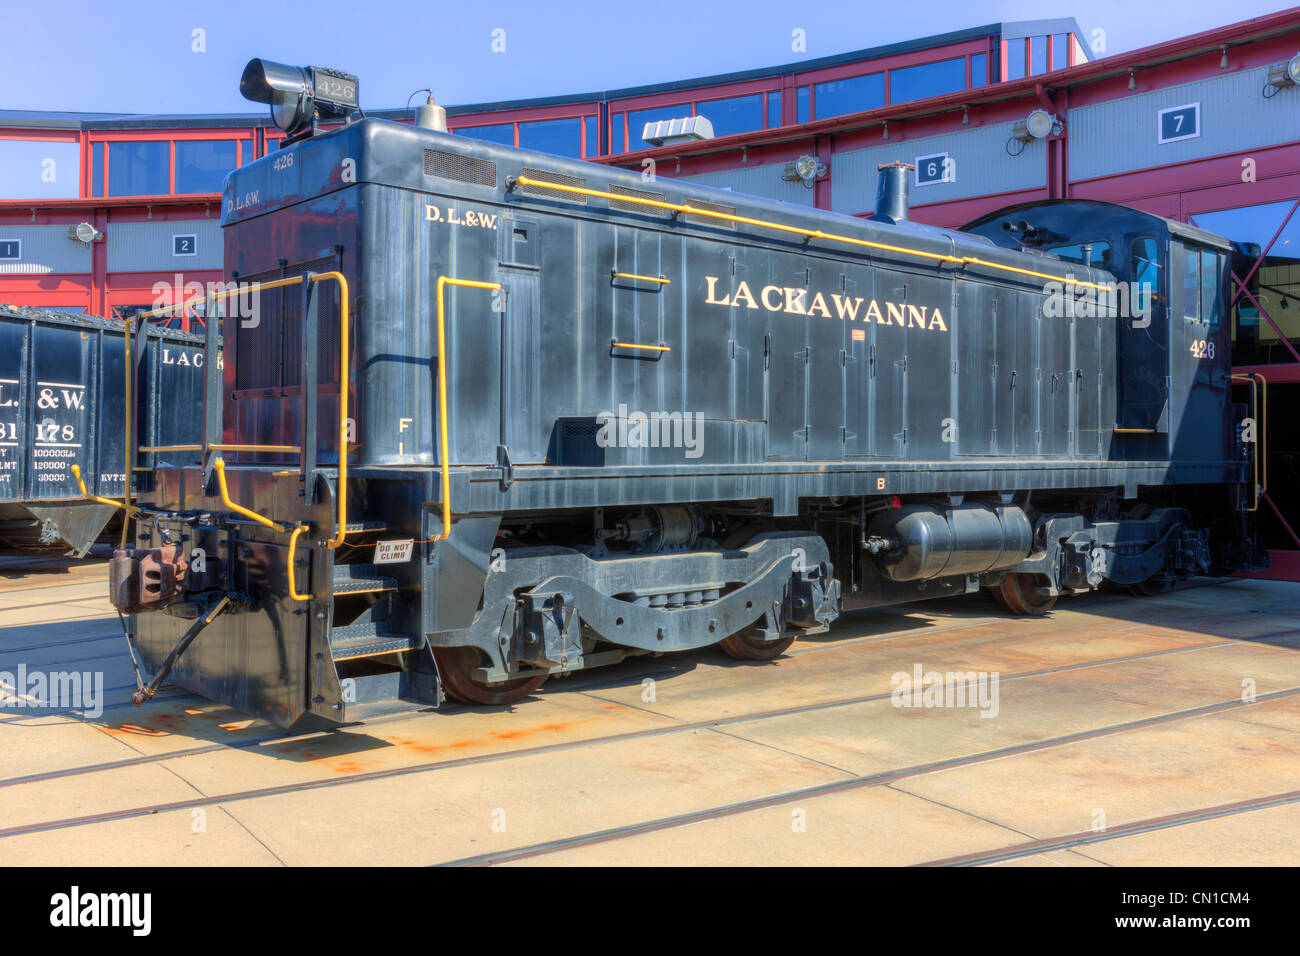 EMC SC diesel switcher in Lackawanna livery on roundhouse tracks at Steamtown National Historic Site in Scranton, Pennsylvania. Stock Photo